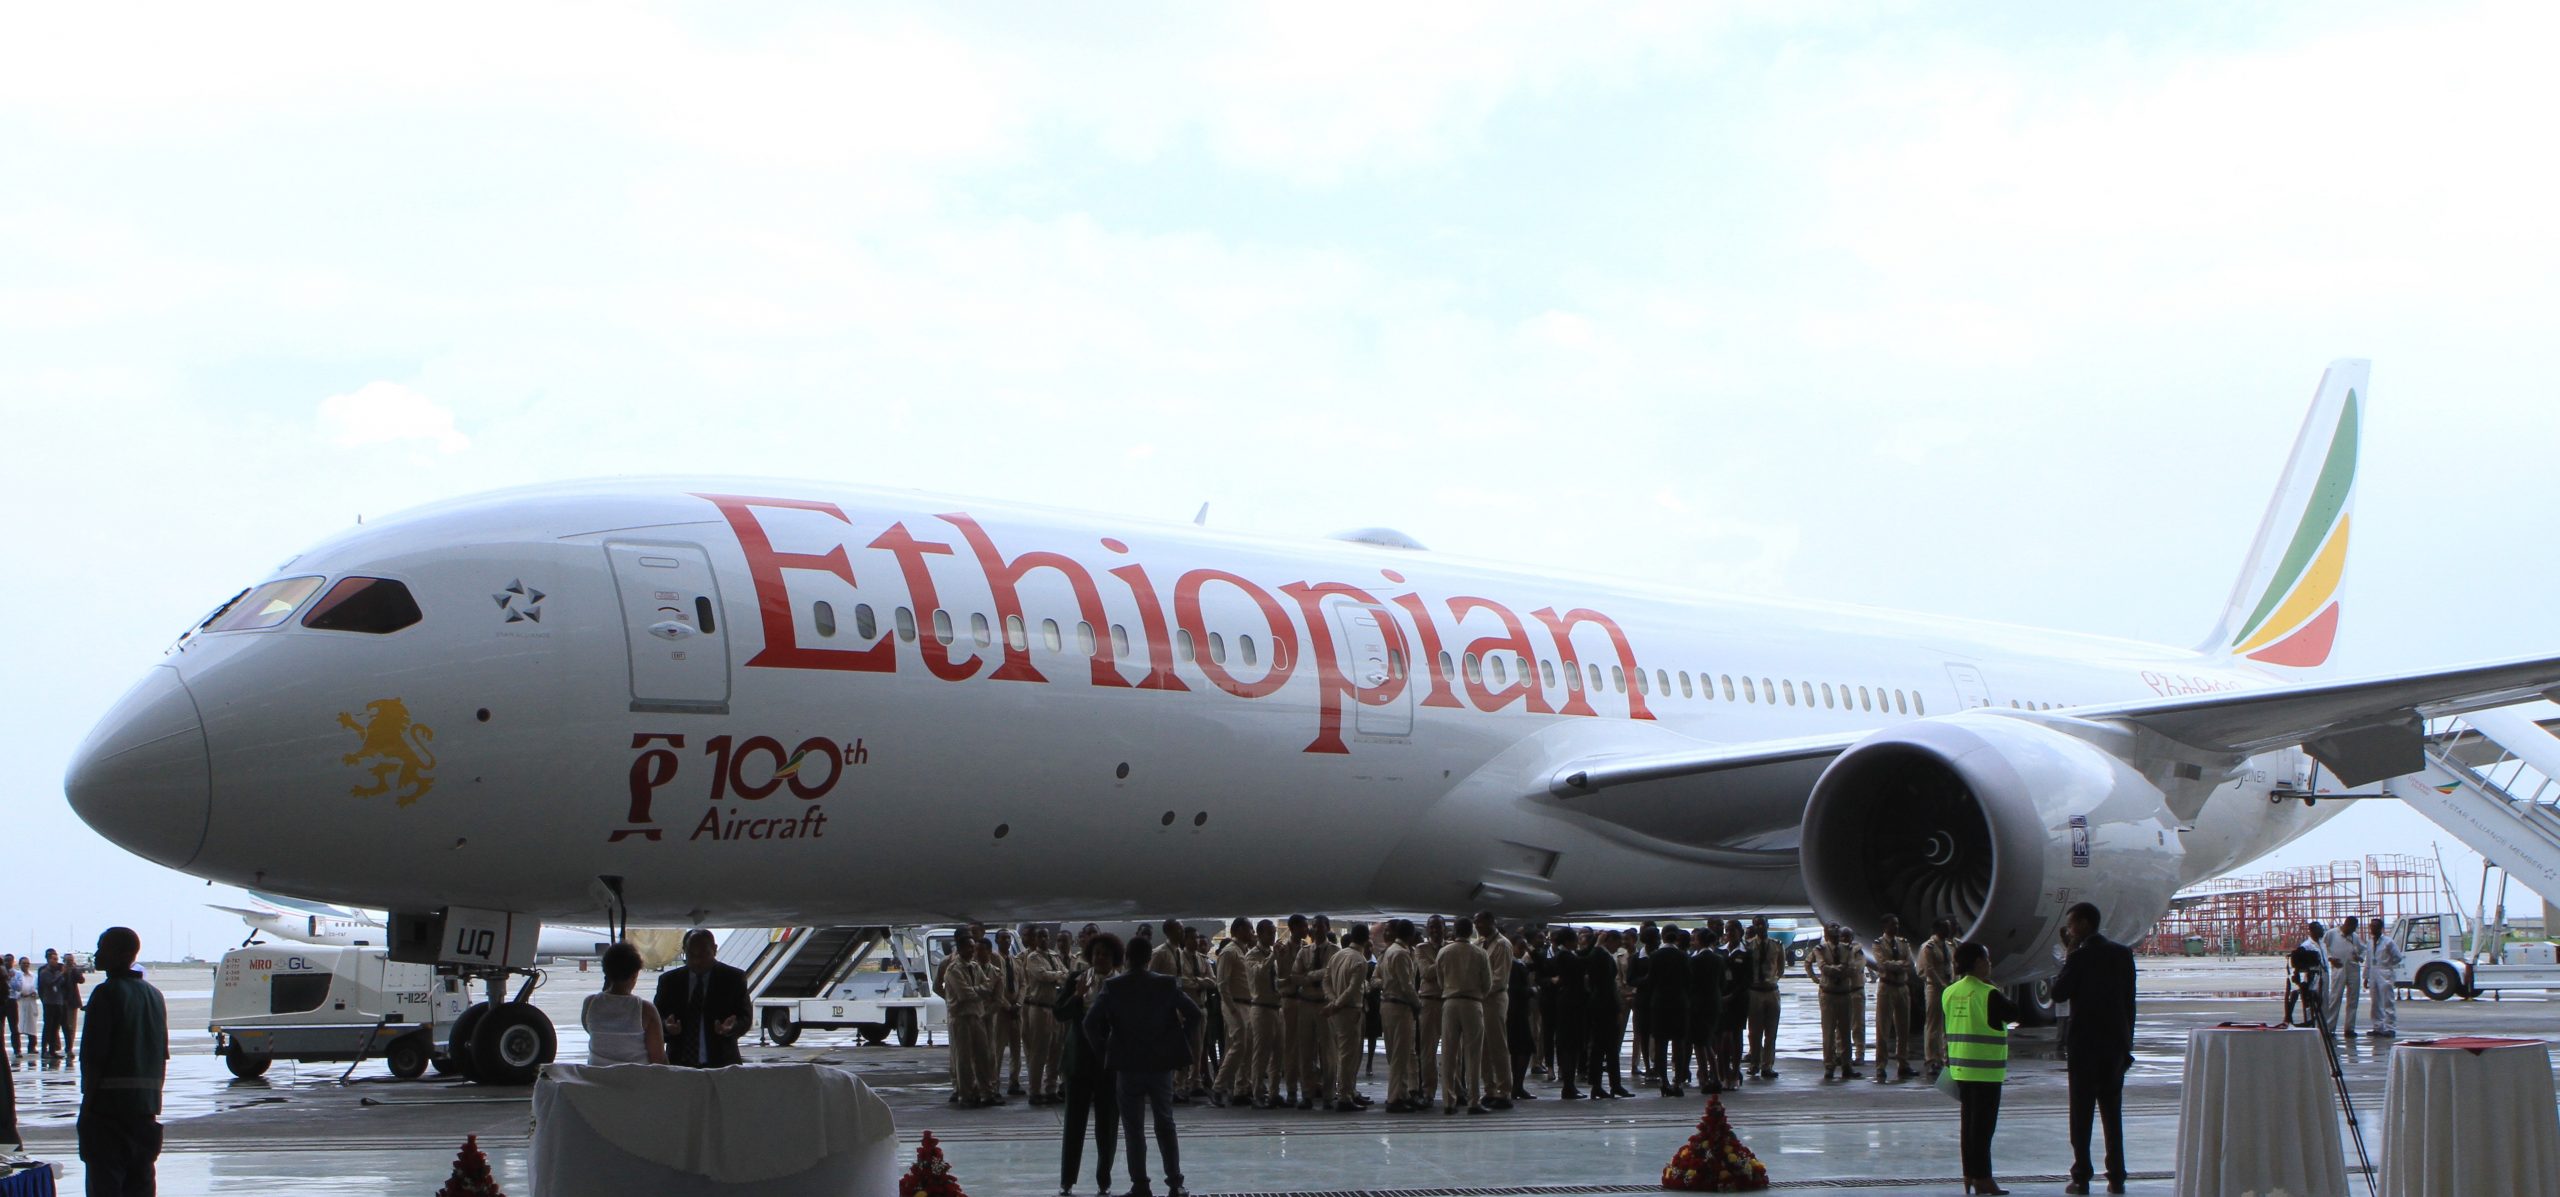 Ethiopian airlines receiving its 100th aircraft.